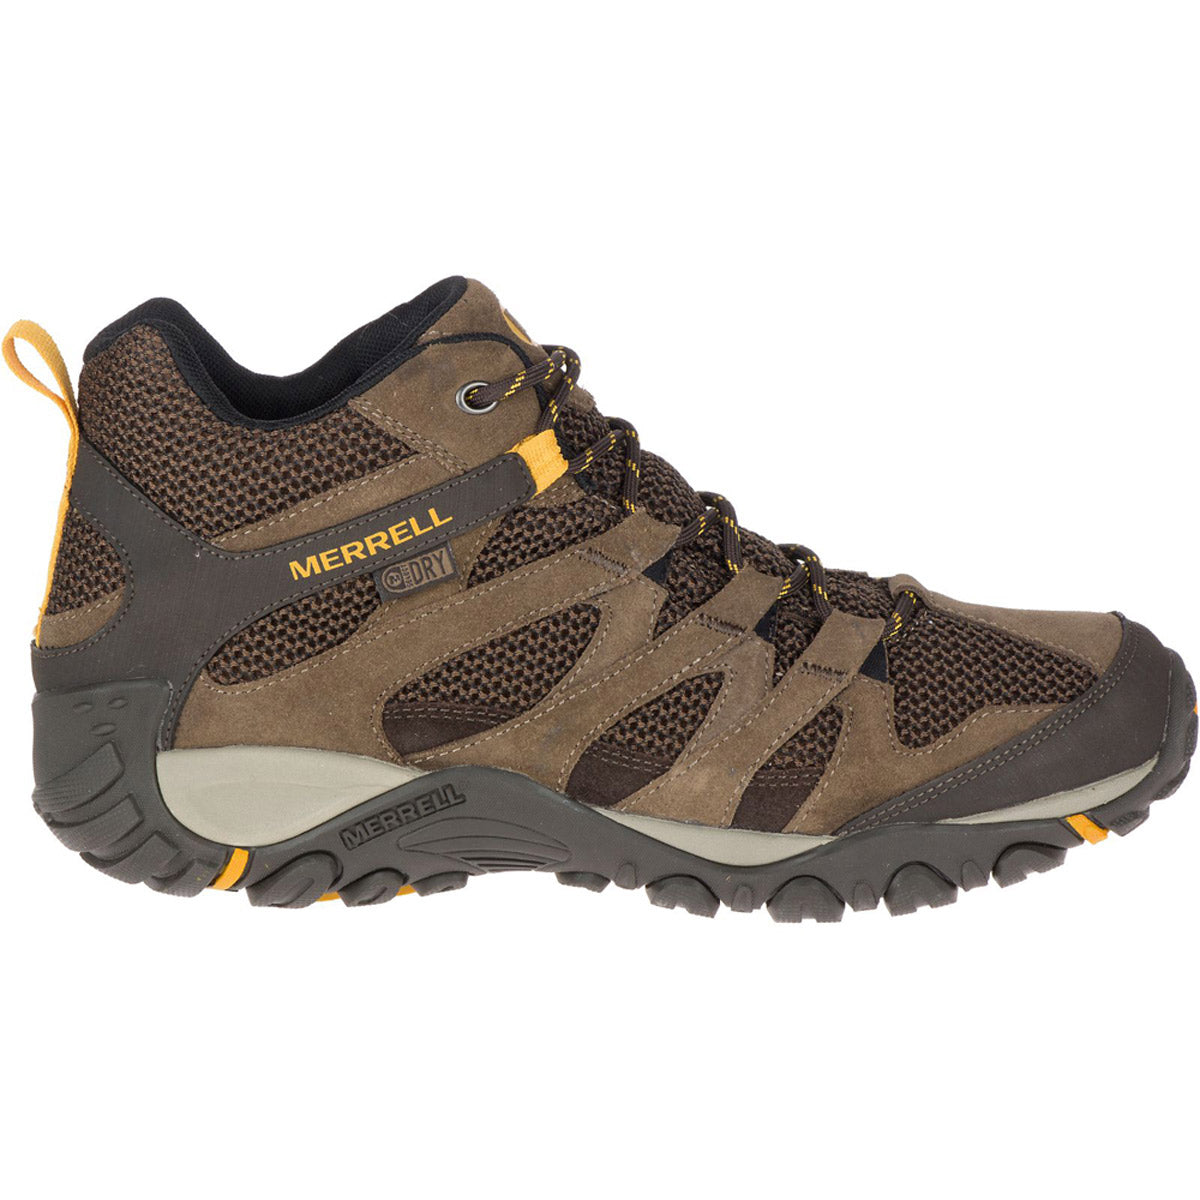 A brown Merrell MERRELL ALVERSTONE MID WATERPROOF STONE hiking boot with mesh inserts and a rugged sole, featuring M Select™ DRY technology.